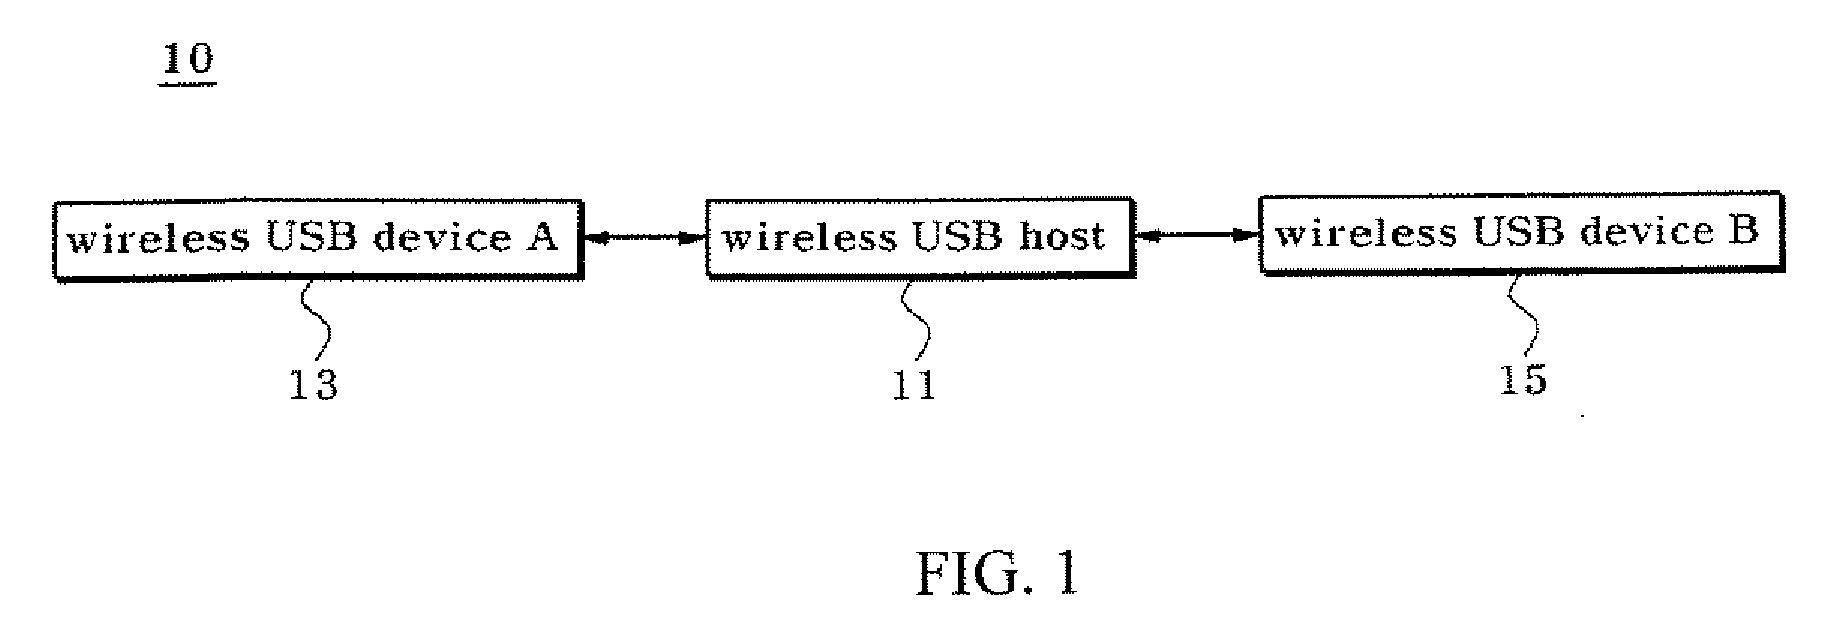 Wireless Universal Serial Bus Dual Role Device